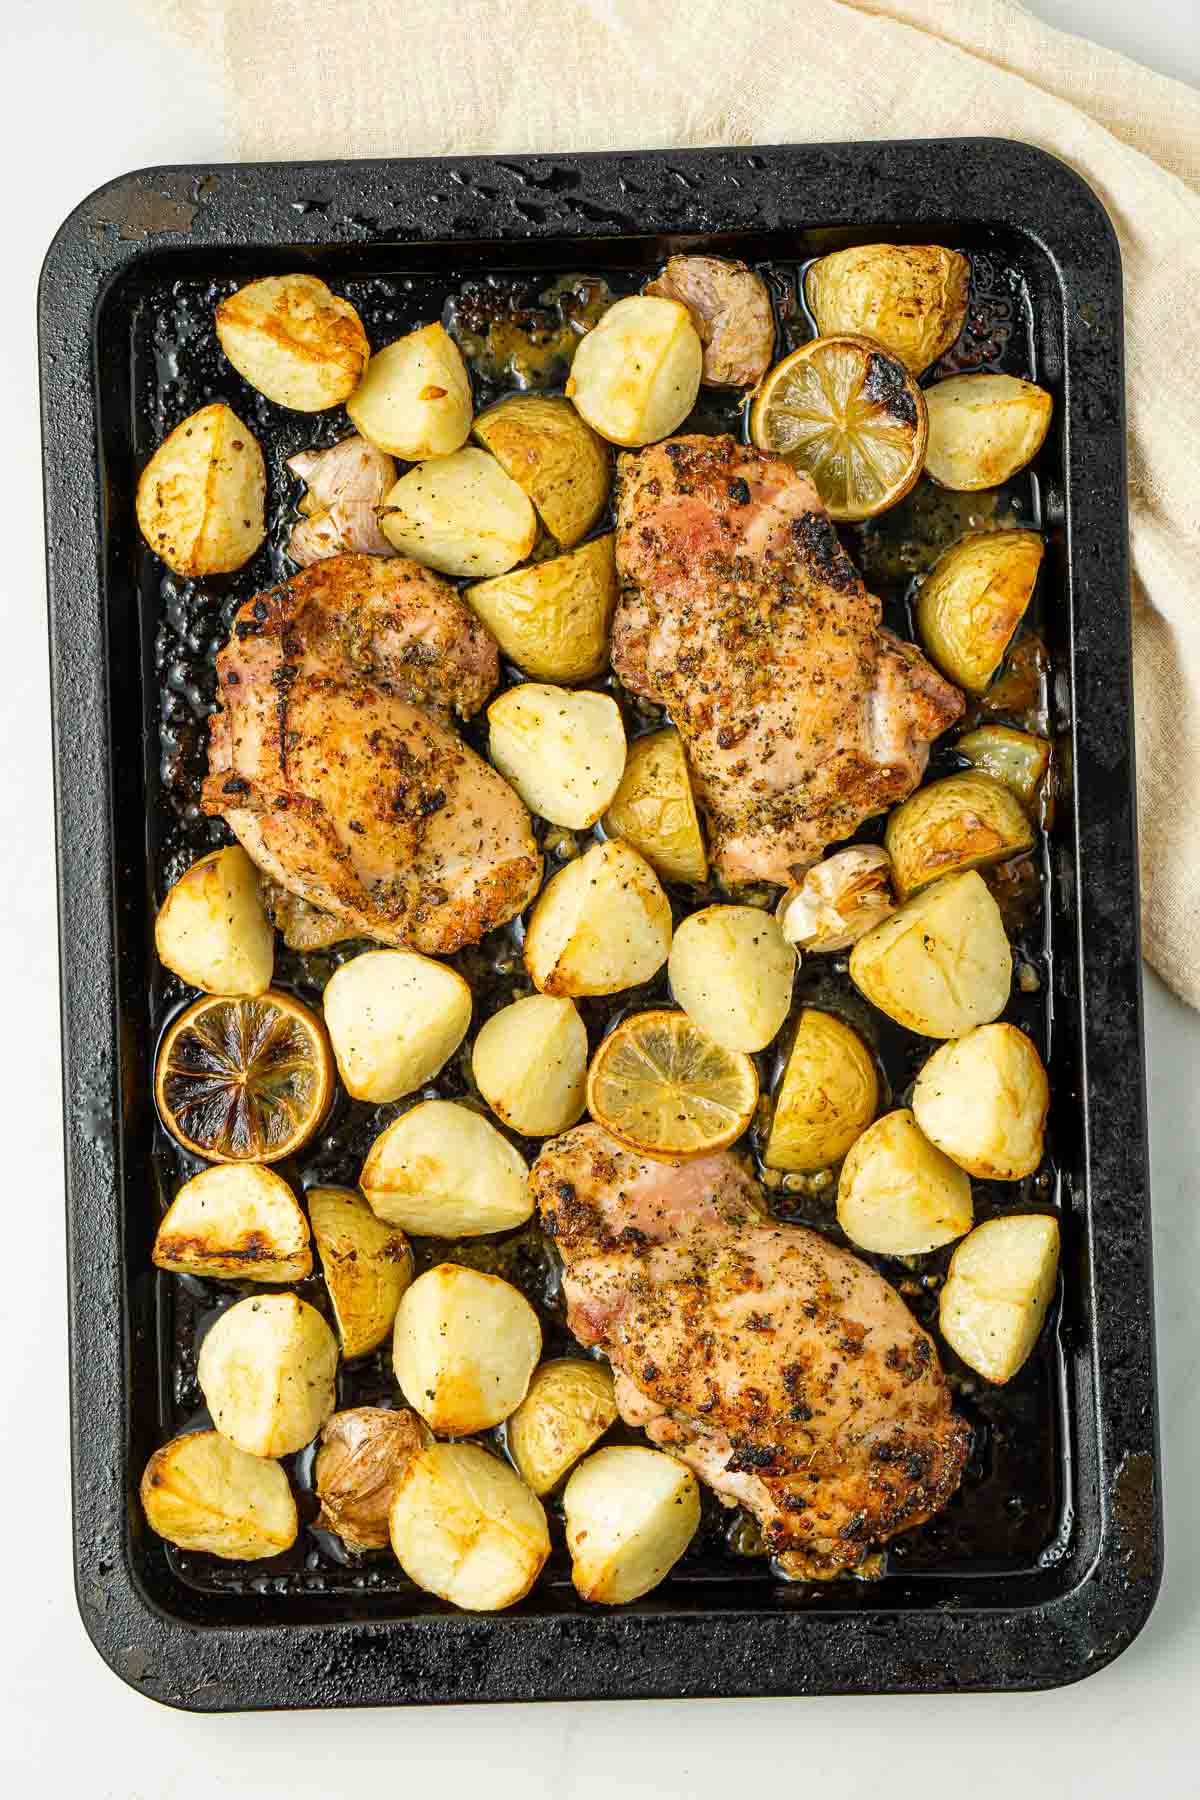 Roasted chicken, potato and lemon on a baking tray.